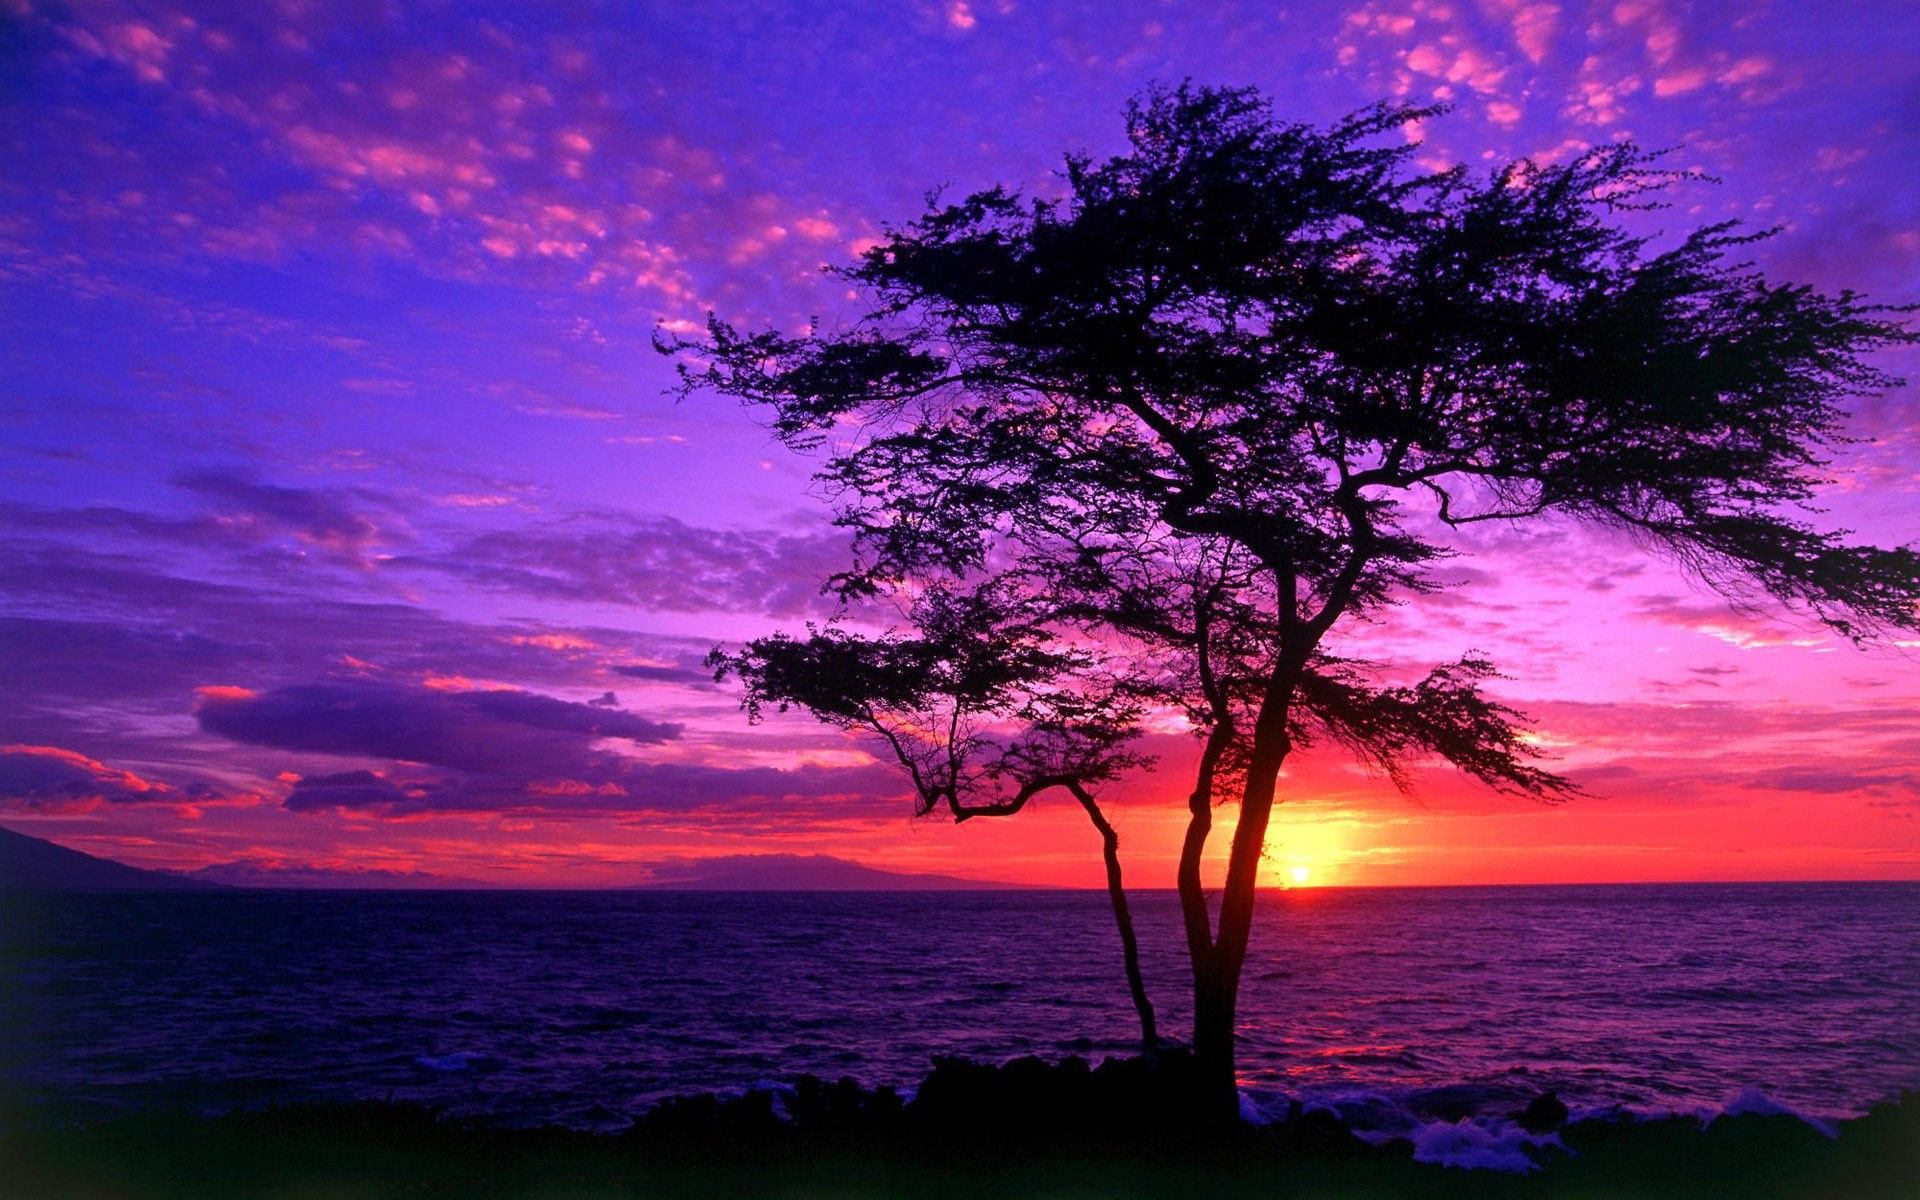 Tree Silhouette In The Purple Sunset